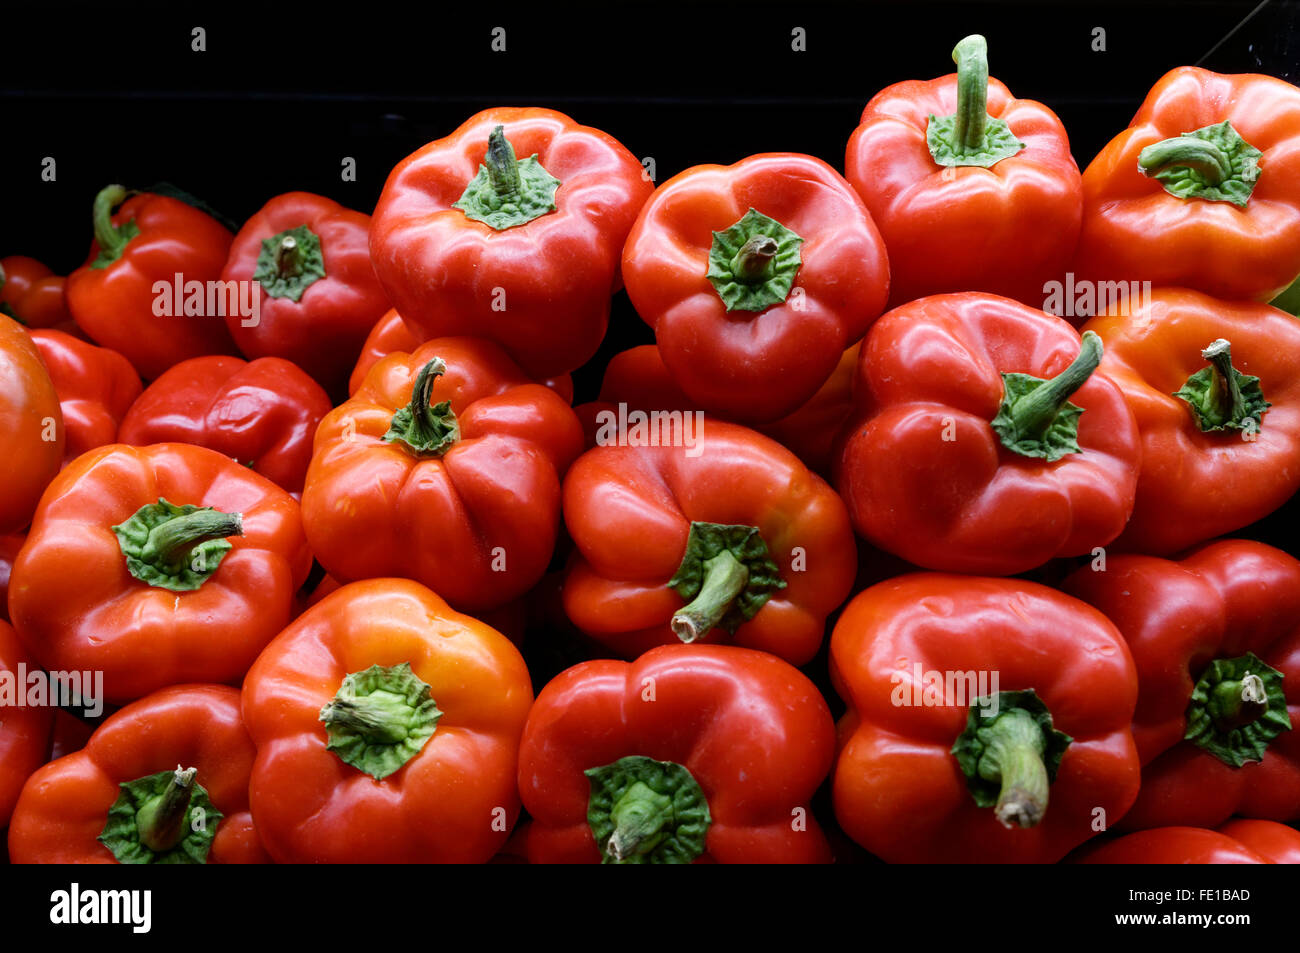 A pile of fresh red peppers Stock Photo